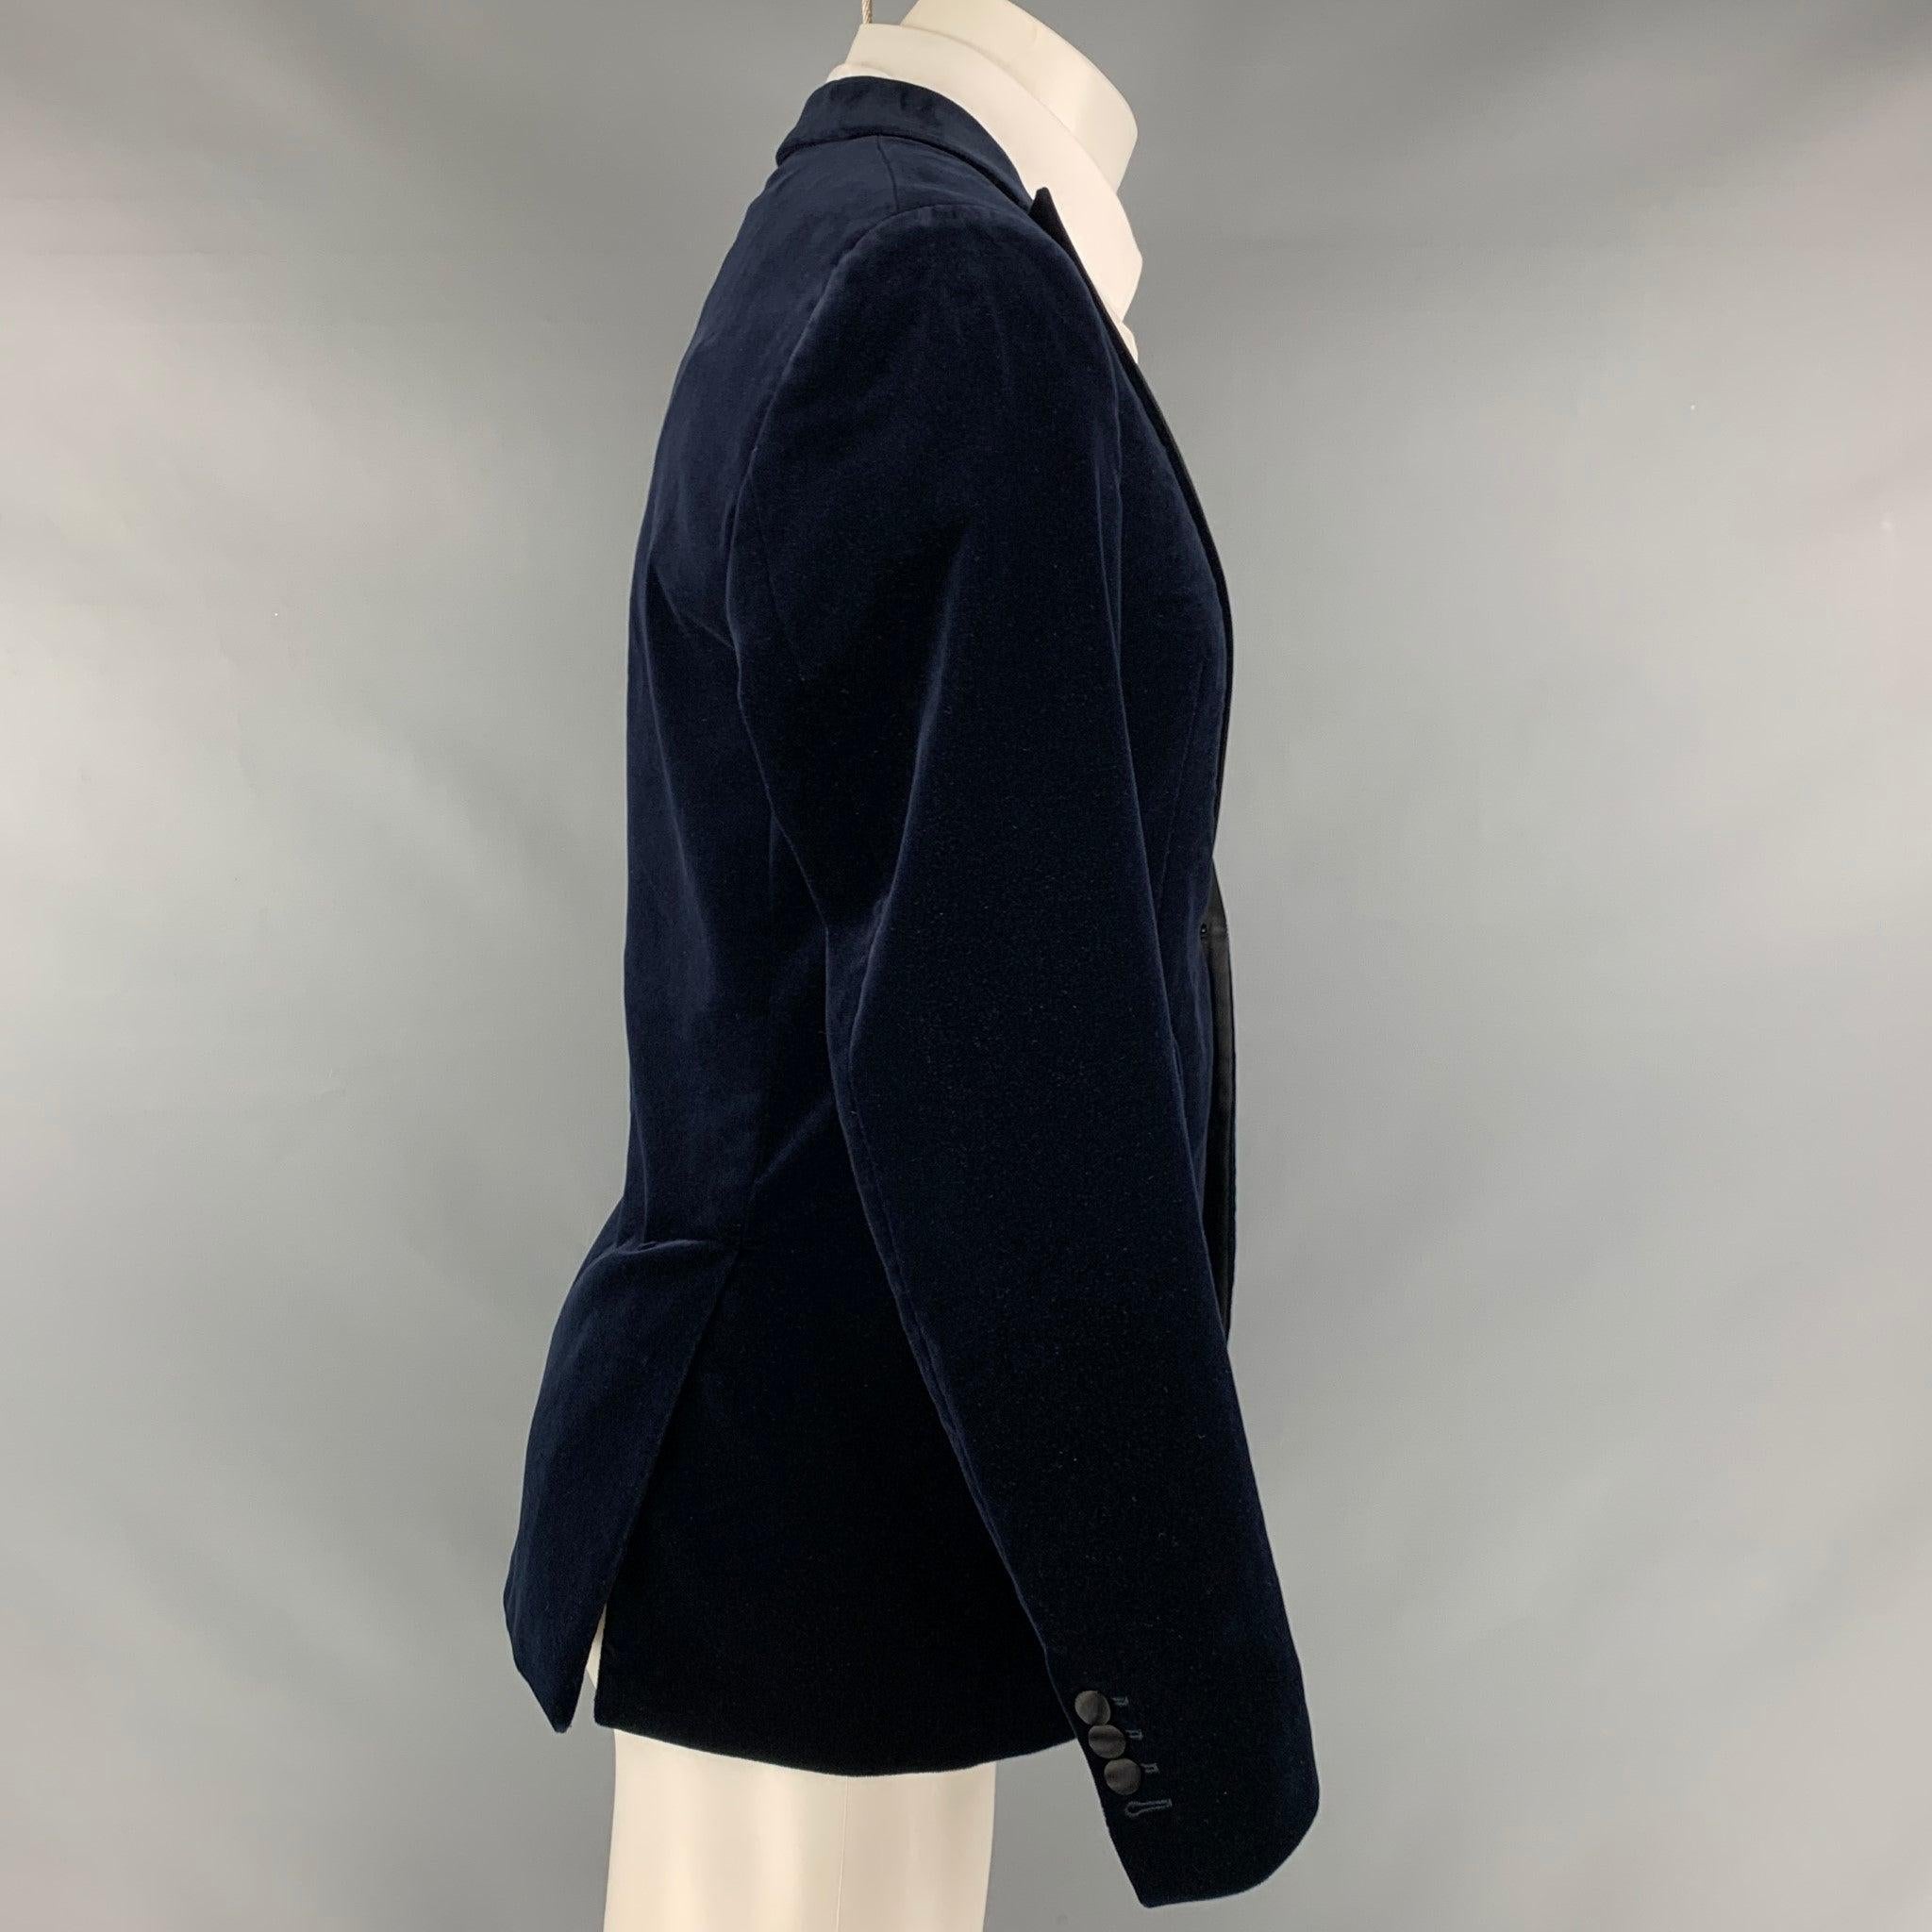 DSQUARED2 sport coat comes in a navy and black velvet with a full liner featuring a peak lapel, flap pockets, and a double button closure. Made in Italy.Excellent Pre-Owned Condition. 

Marked:   50 

Measurements: 
 
Shoulder: 17.5 inches Chest: 42